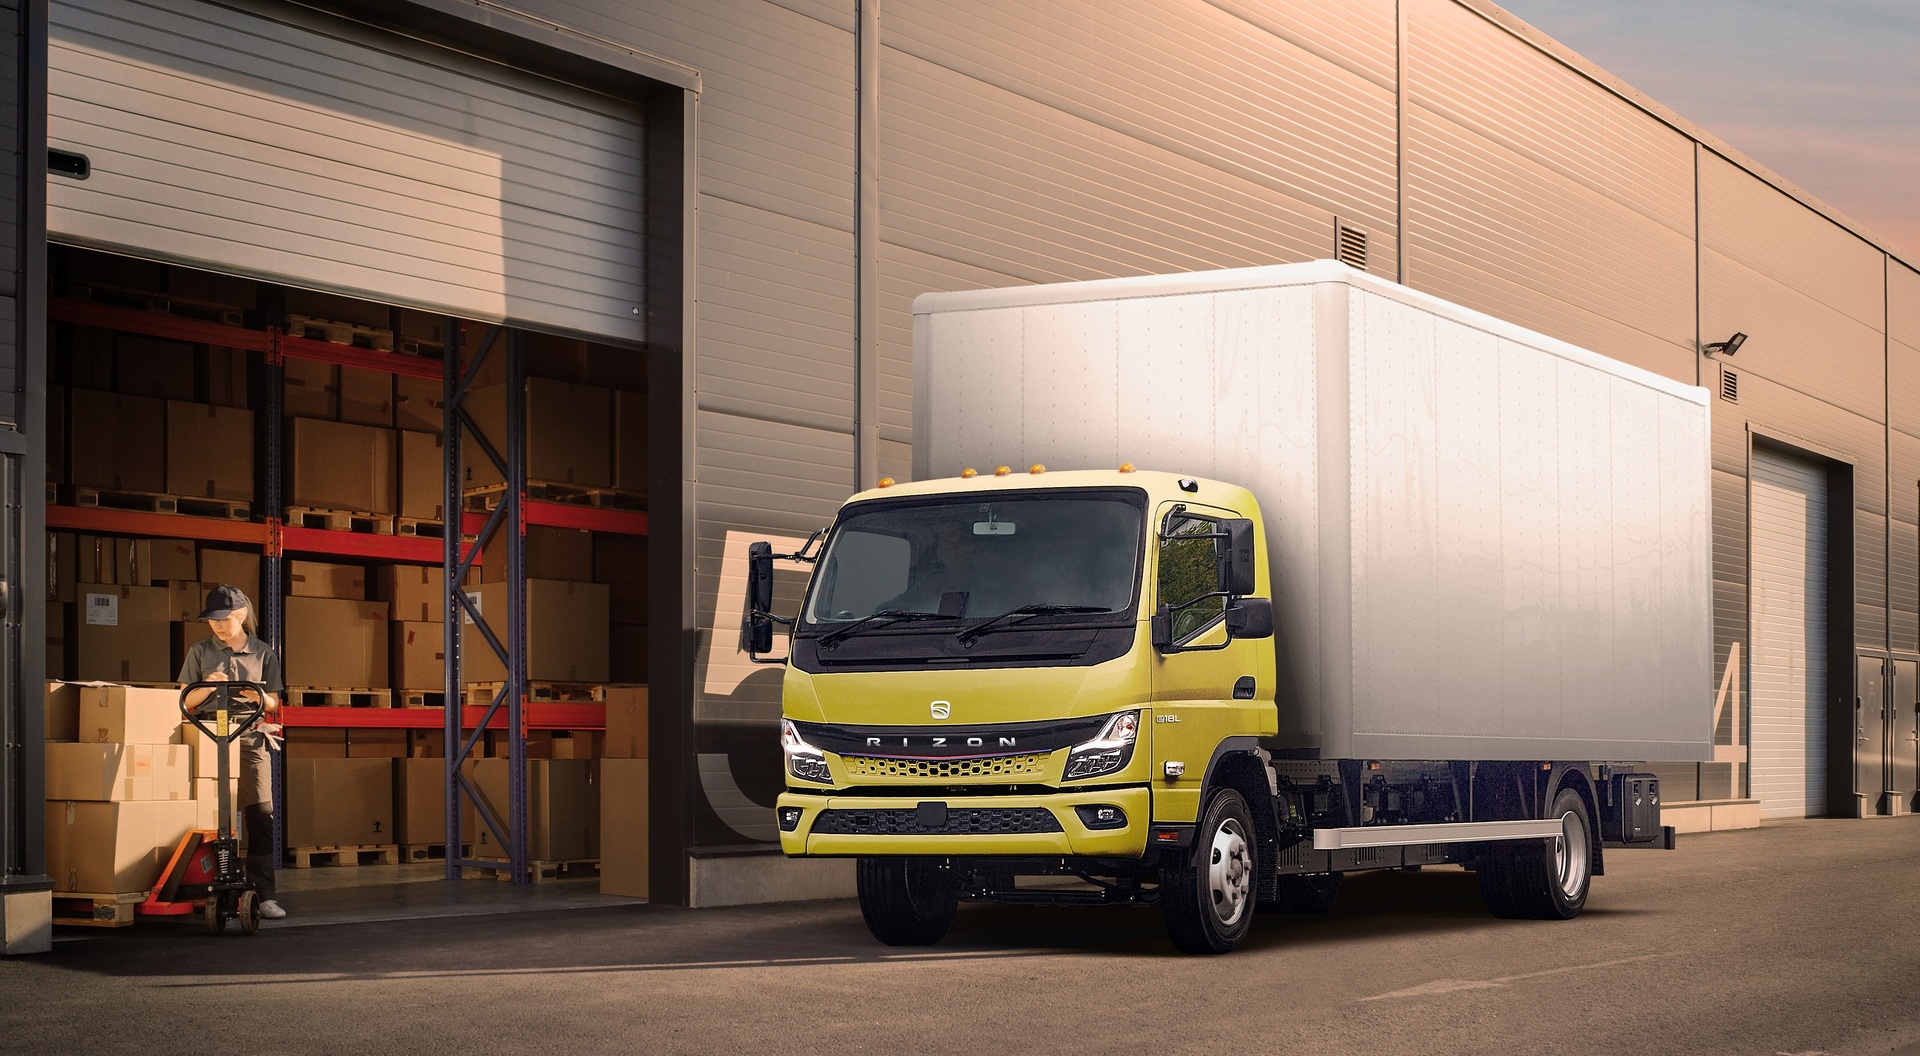 Daimler Truck electric truck brand RIZON has achieved full homologation in the U.S.